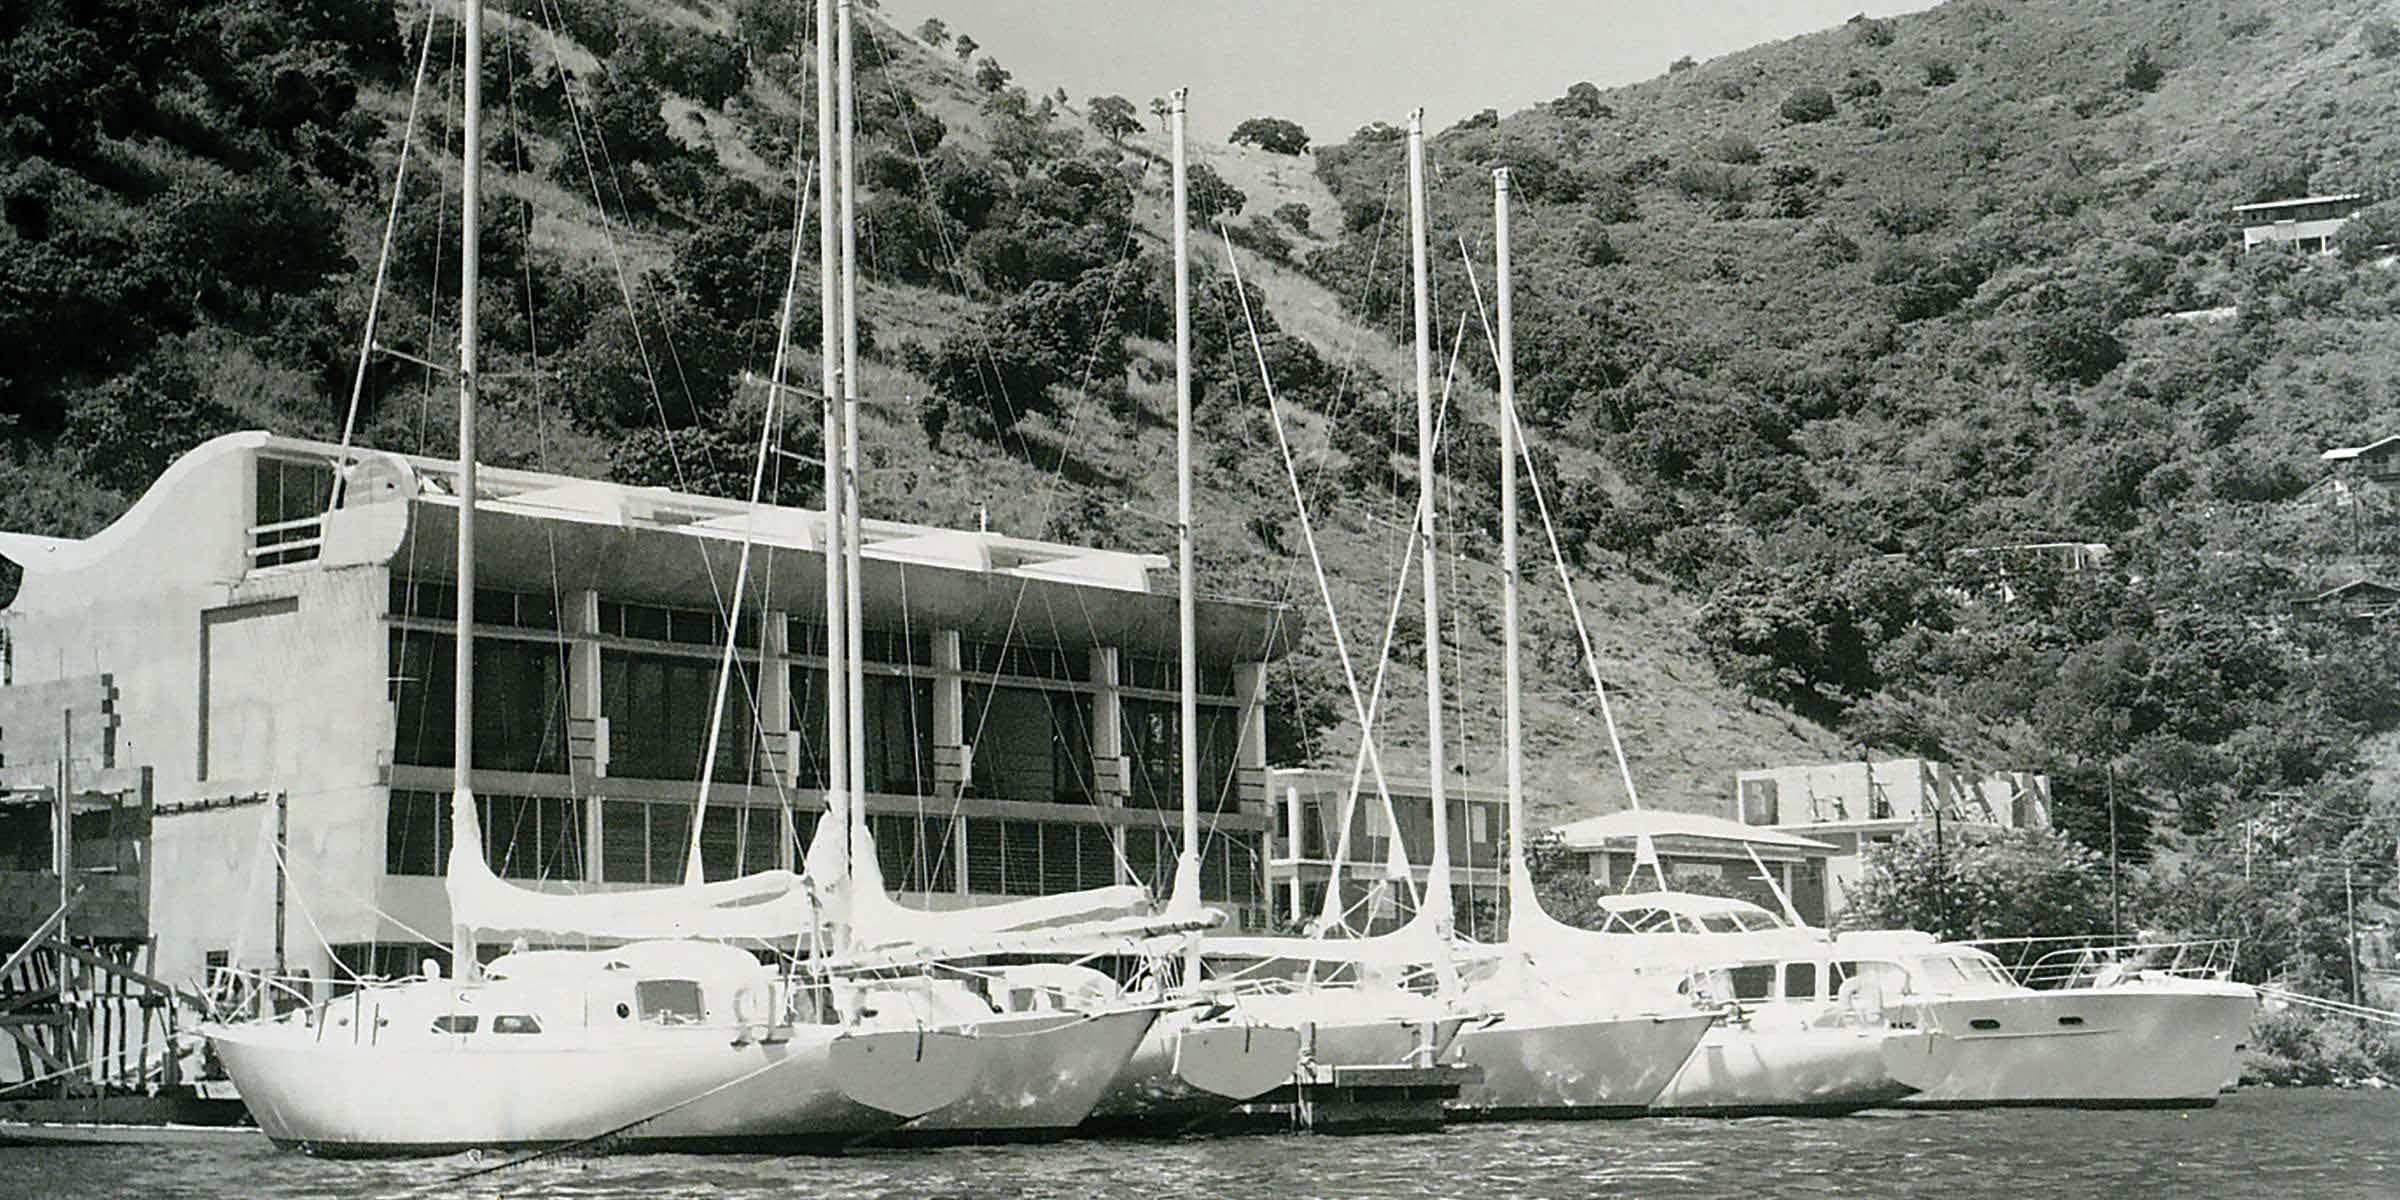 The first Pearson Yachts at The Moorings base in Tortola